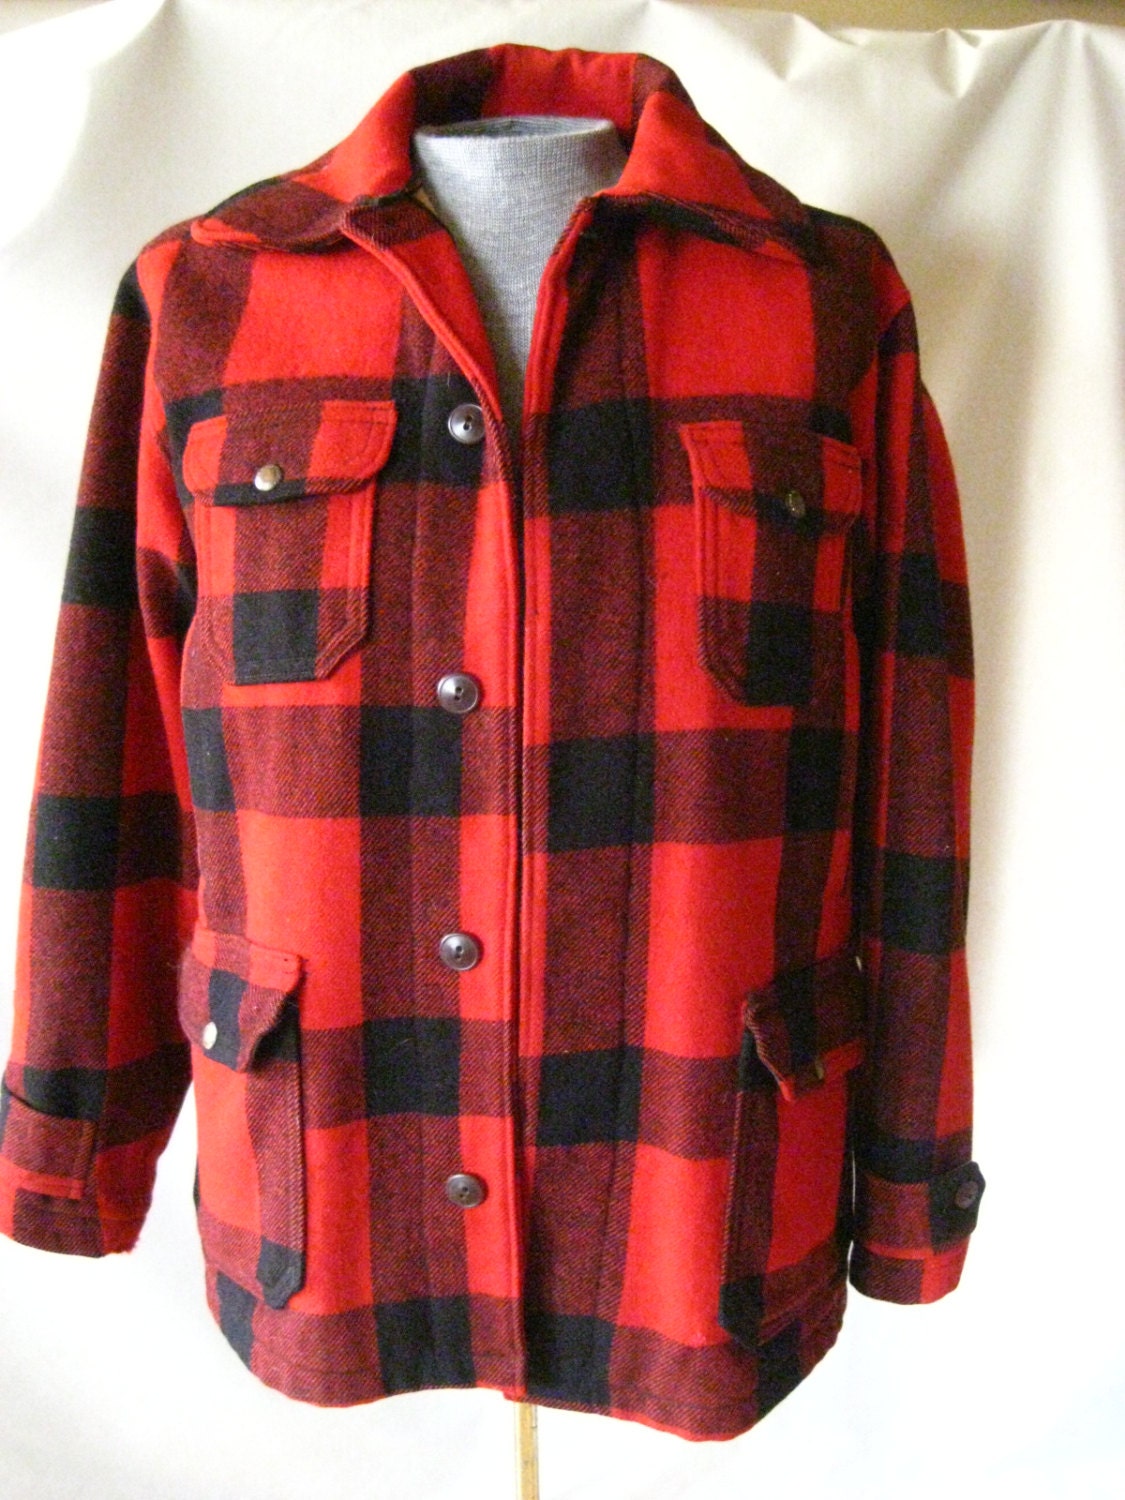 Woolrich Red and Black Plaid Mens Jacket Coat by NorthPondVintage